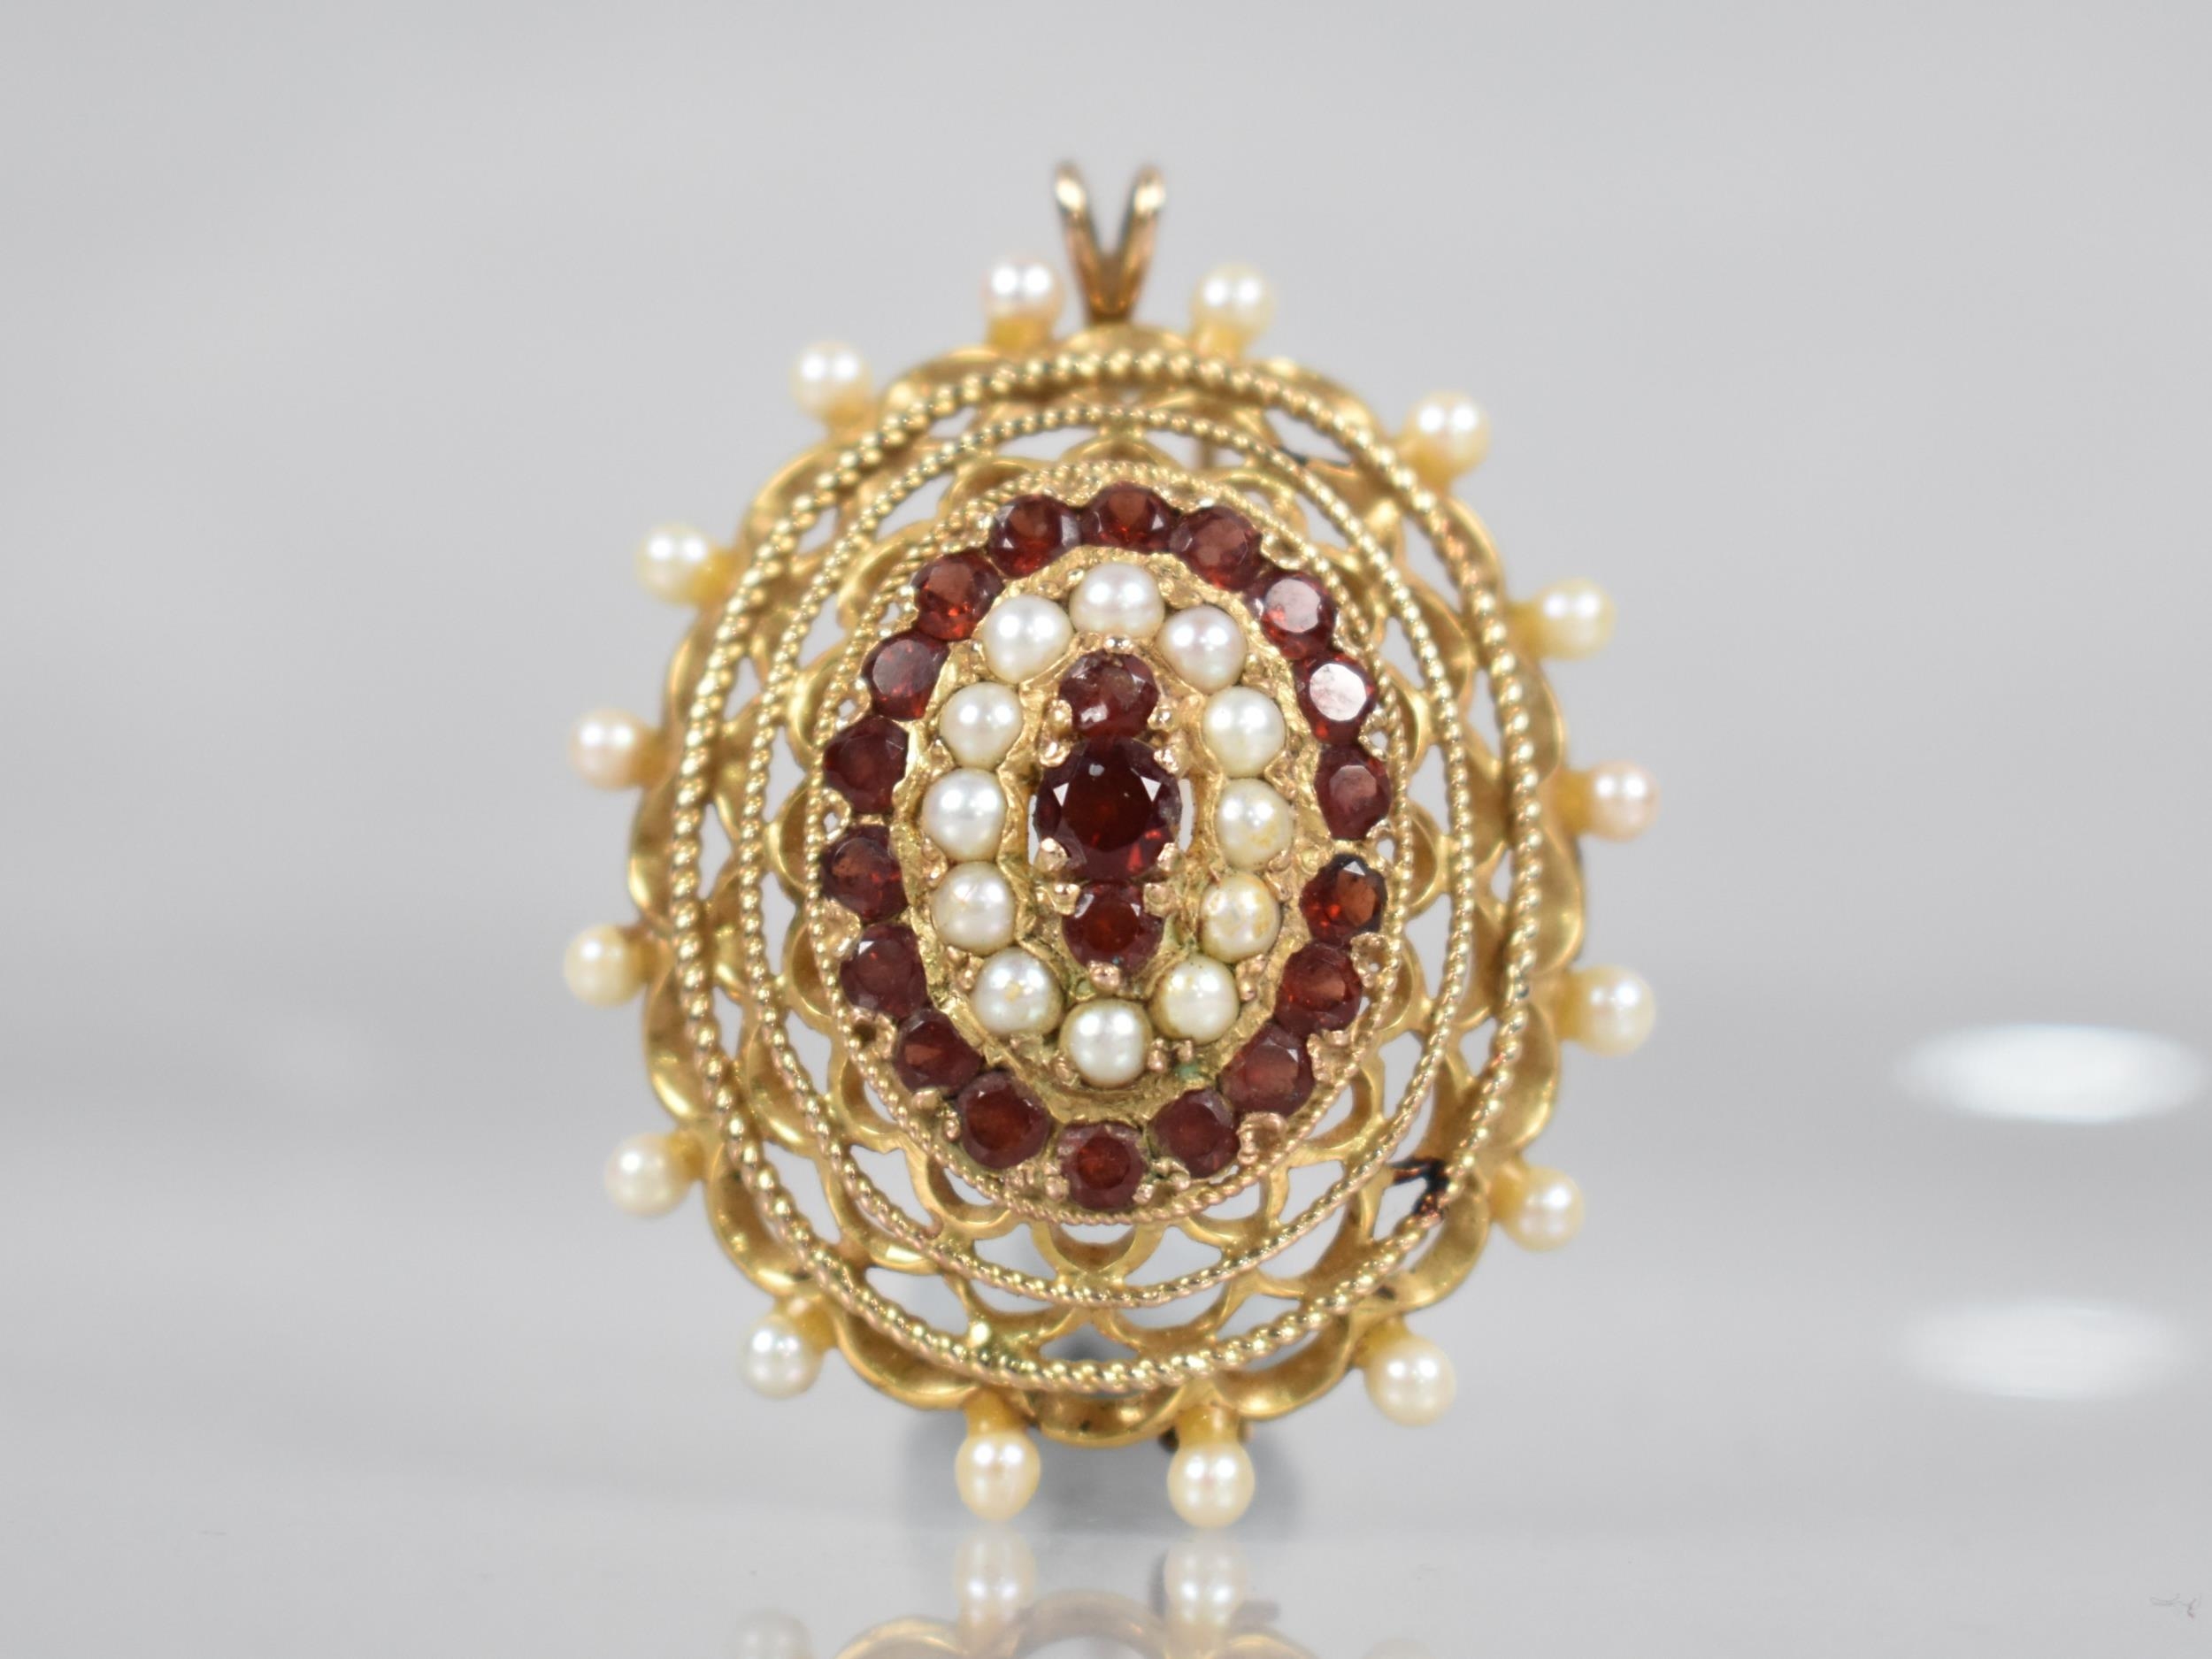 A 9ct Gold, Garnet and Pearl Brooch/Pendant of Oval Pierced Form by Zeeta, Central Round Cut